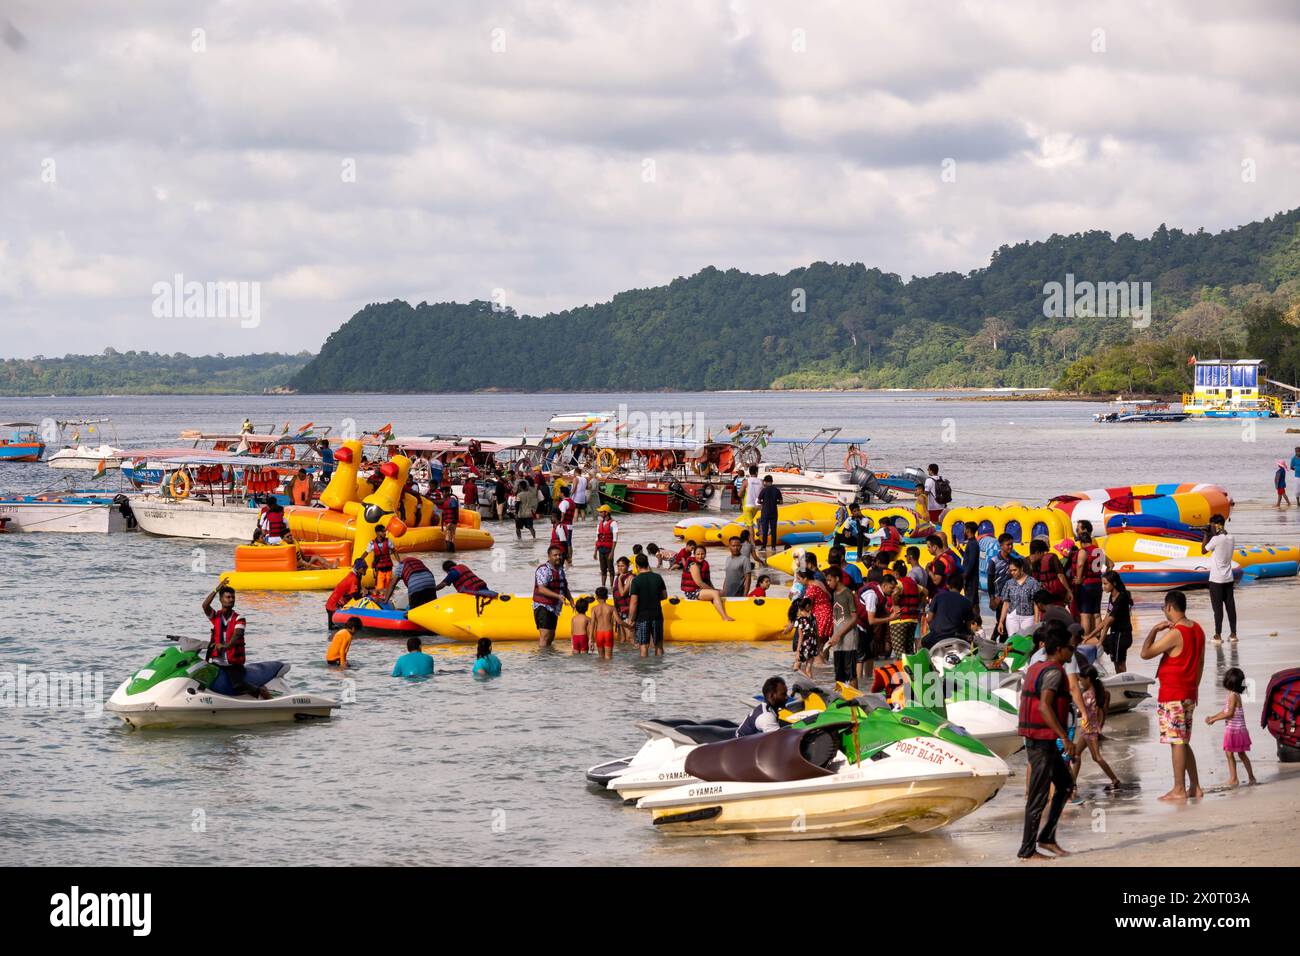 The beach is dotted with colorful inflatable boats and banana boats, with people on board enjoying the water. Stock Photo